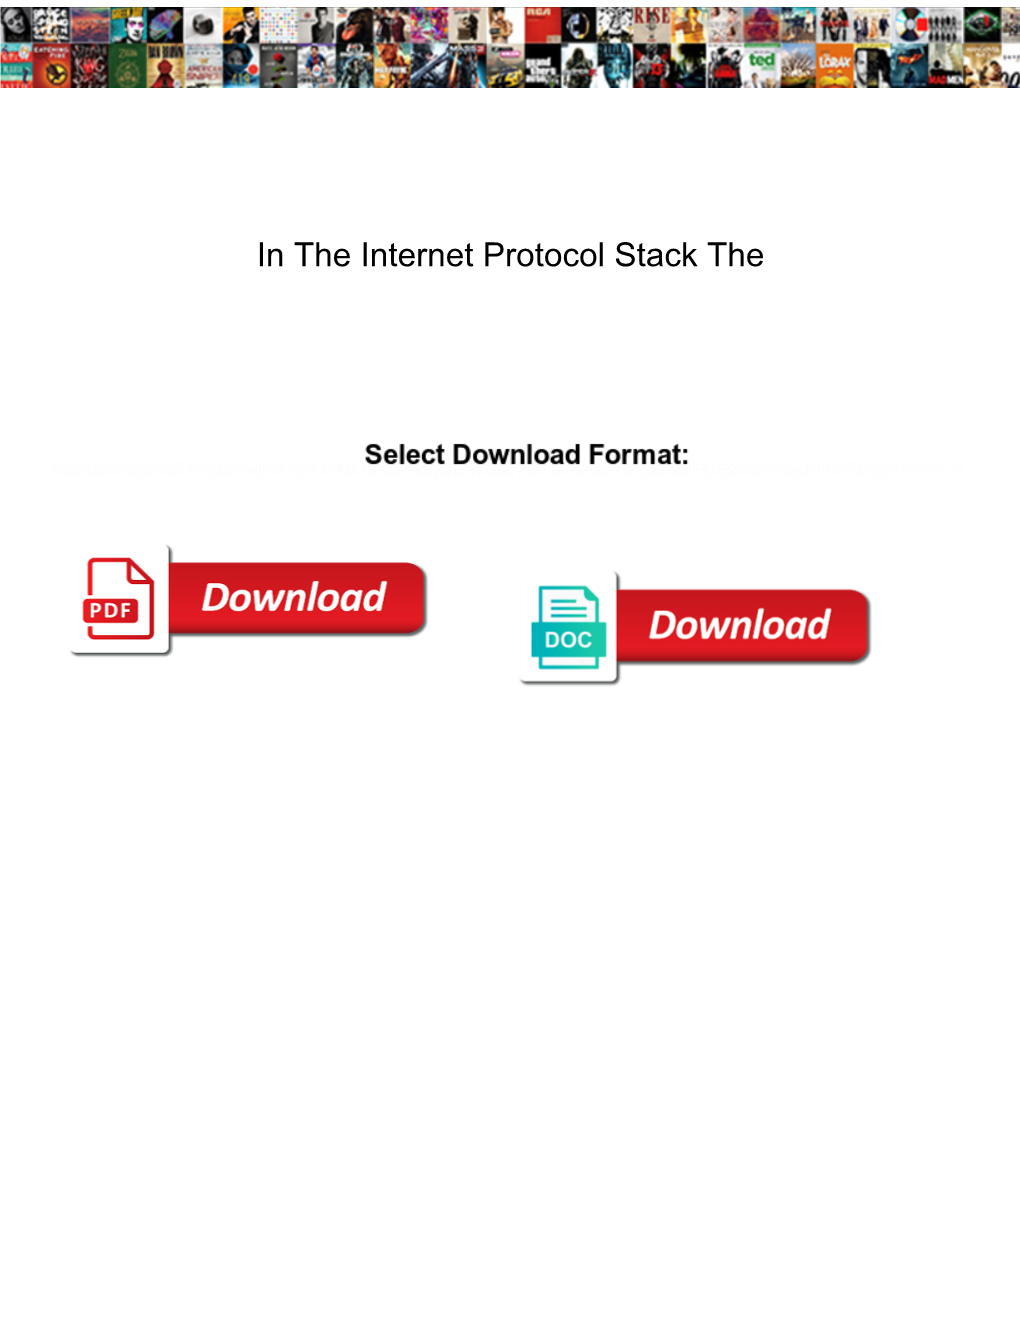 In the Internet Protocol Stack The